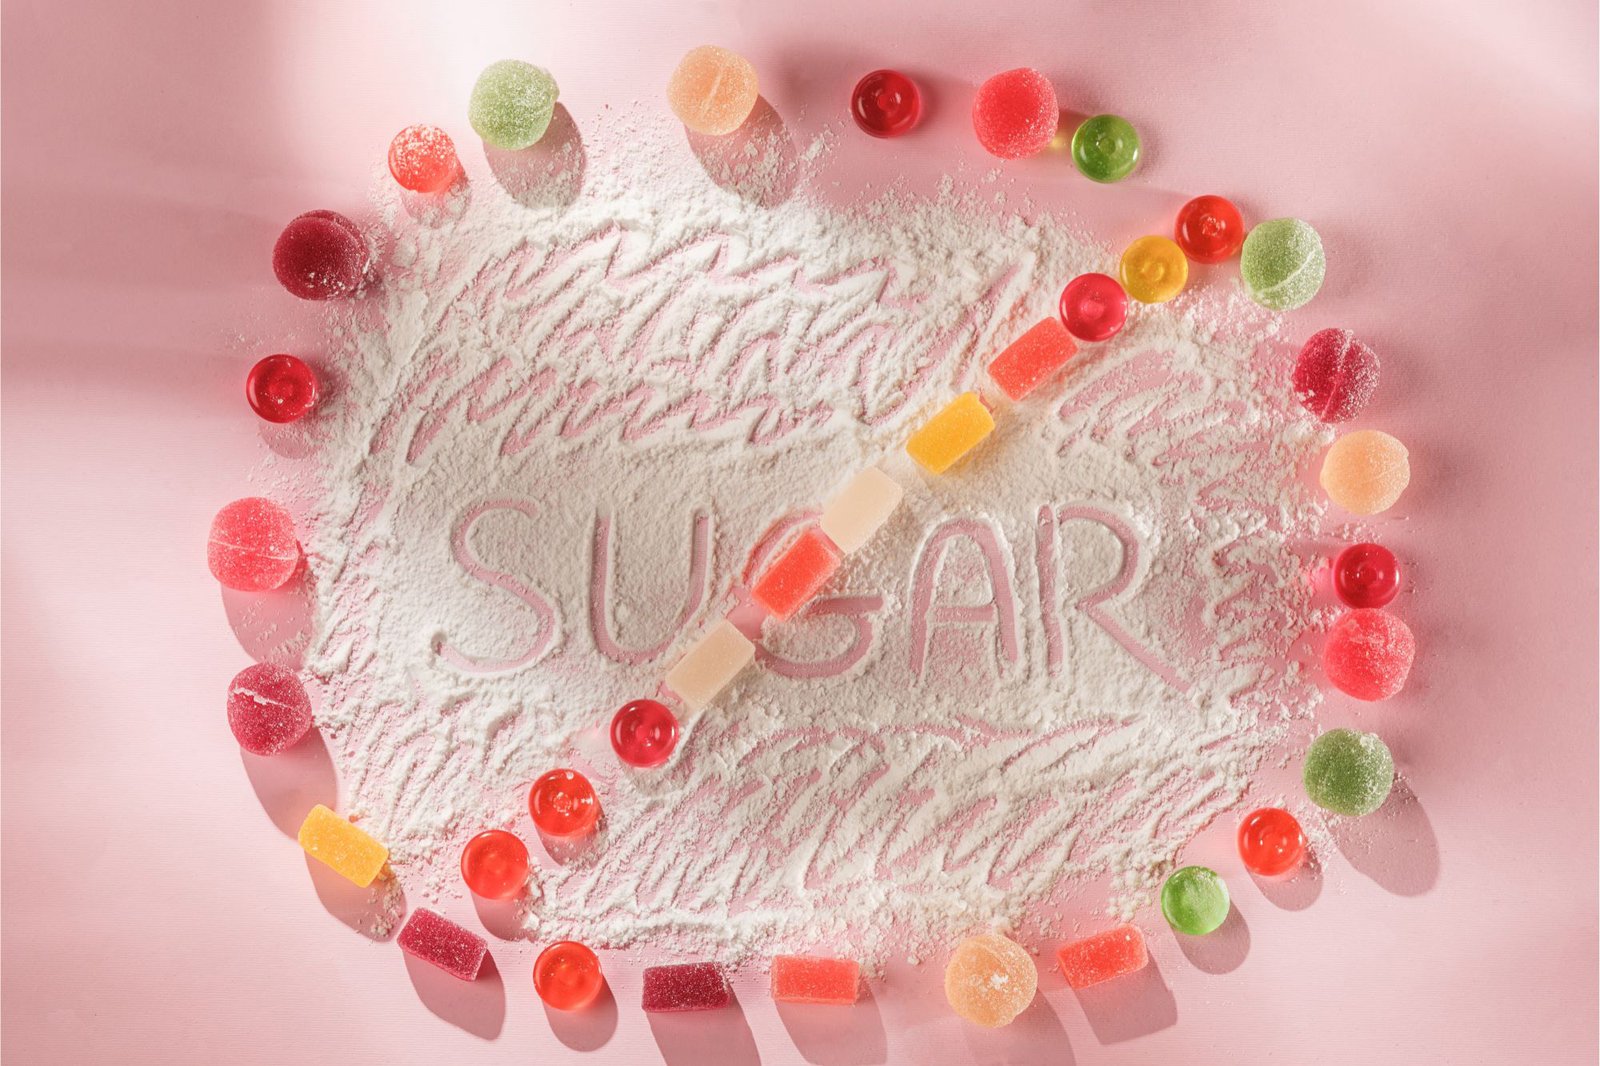 Does Sugar-Free Candy Give You Gas? Scientists Have Discovered Why